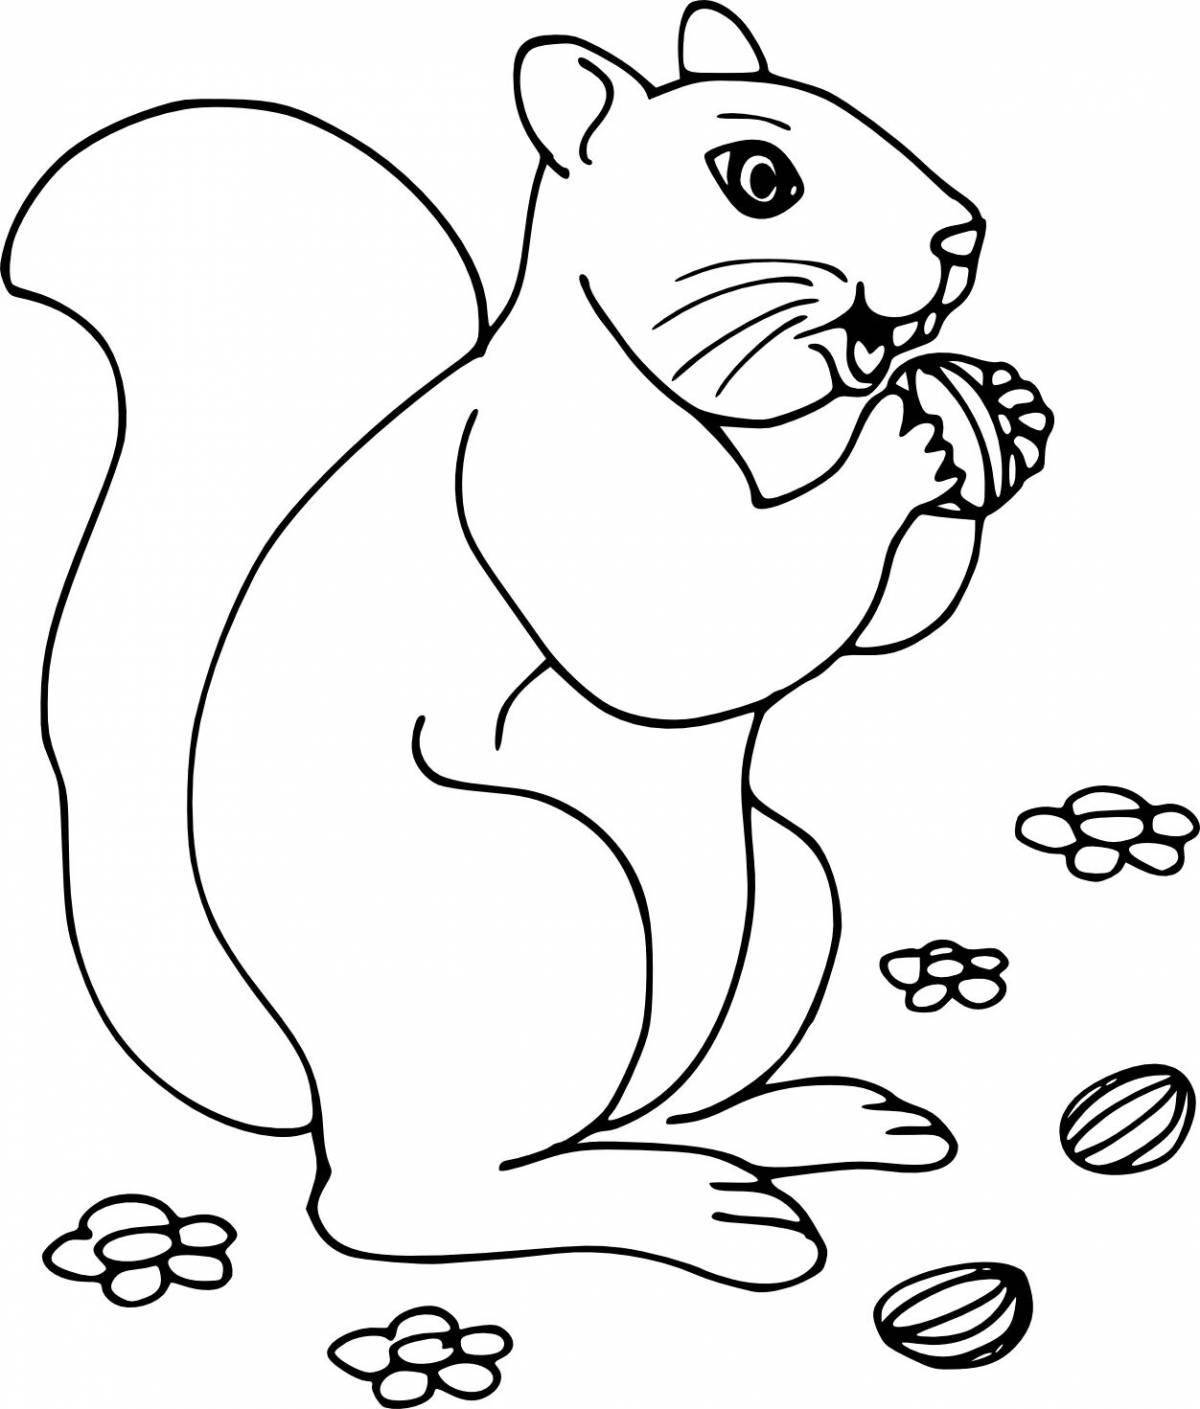 Great chipmunk coloring book for kids